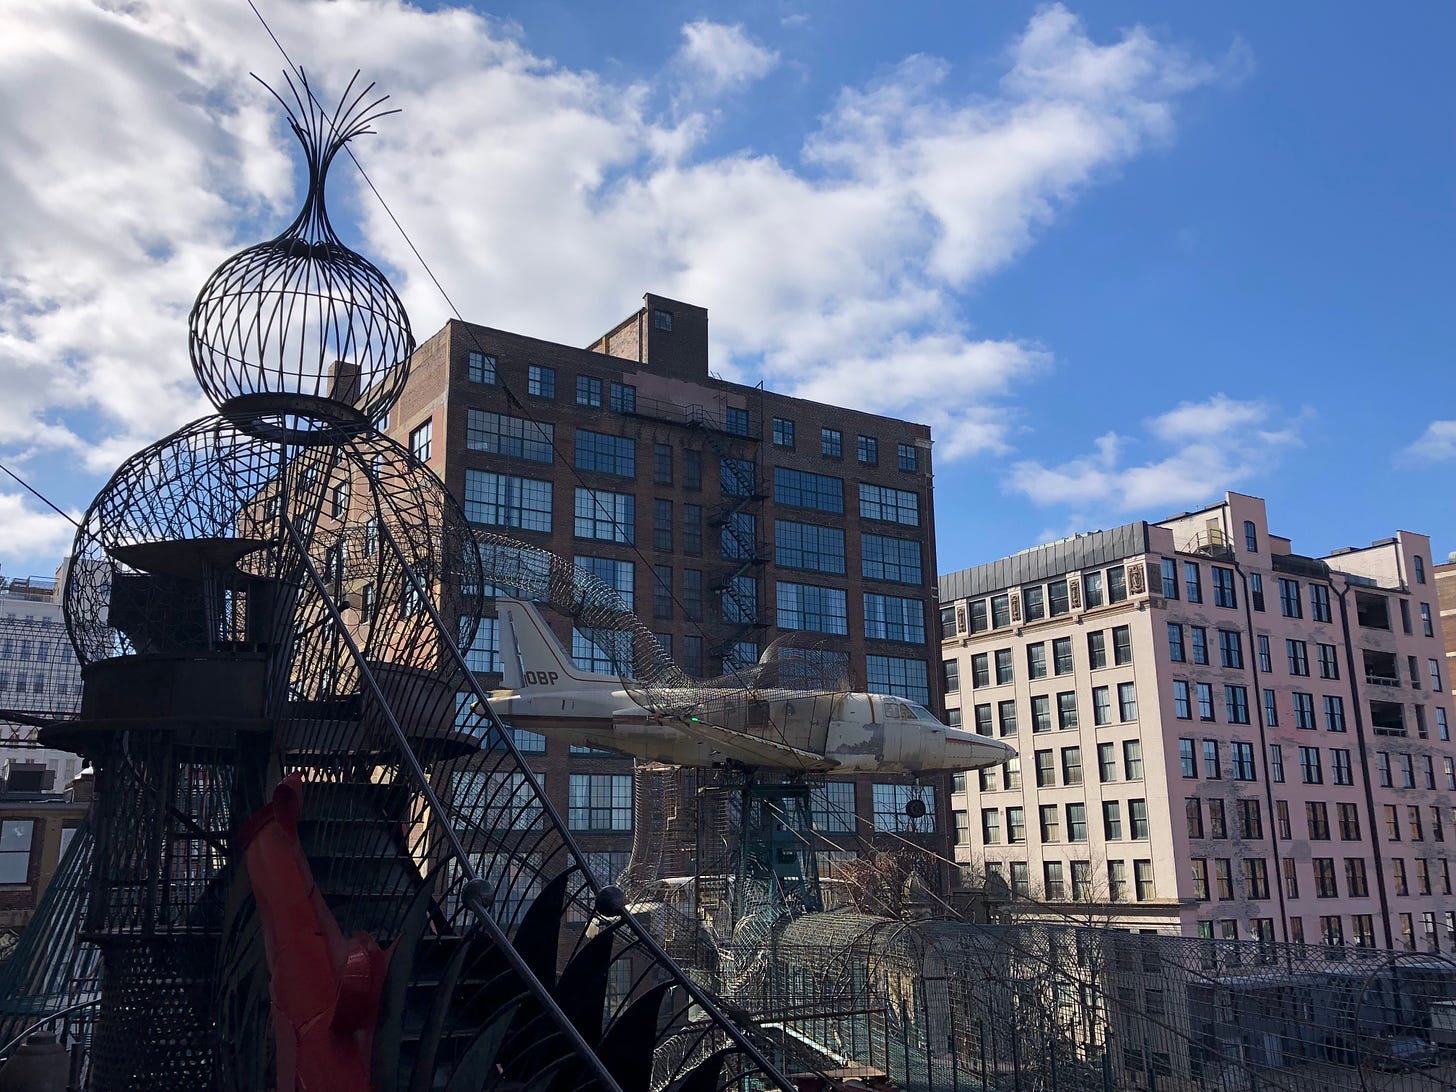 outdoor image of the City Museum, including an old plane and wire walkways